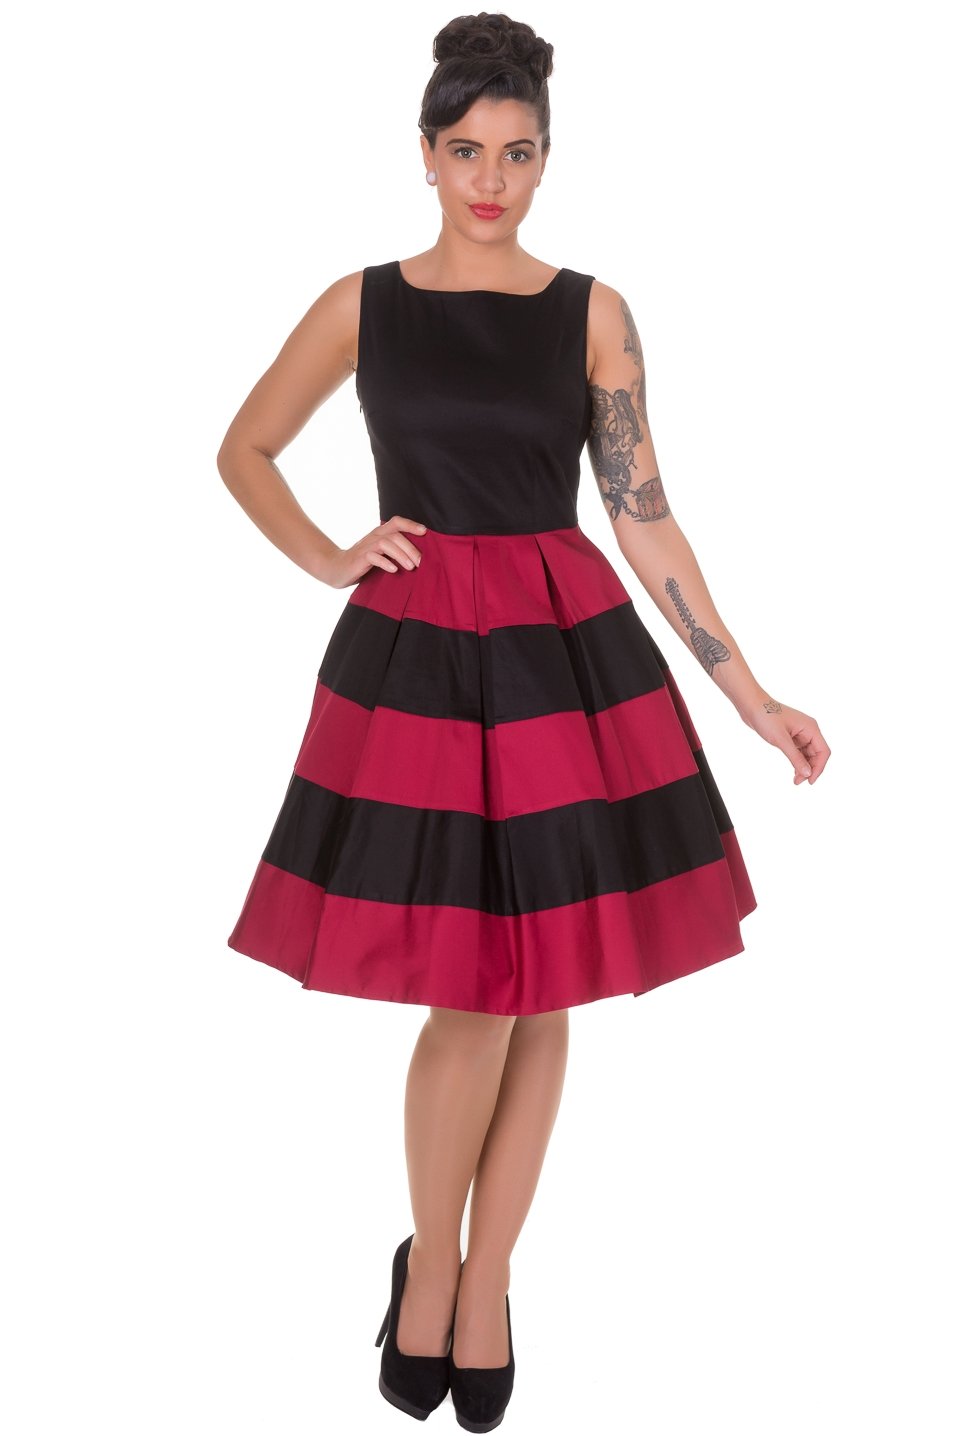 Model wearing black and red striped sleeveless dress, front view